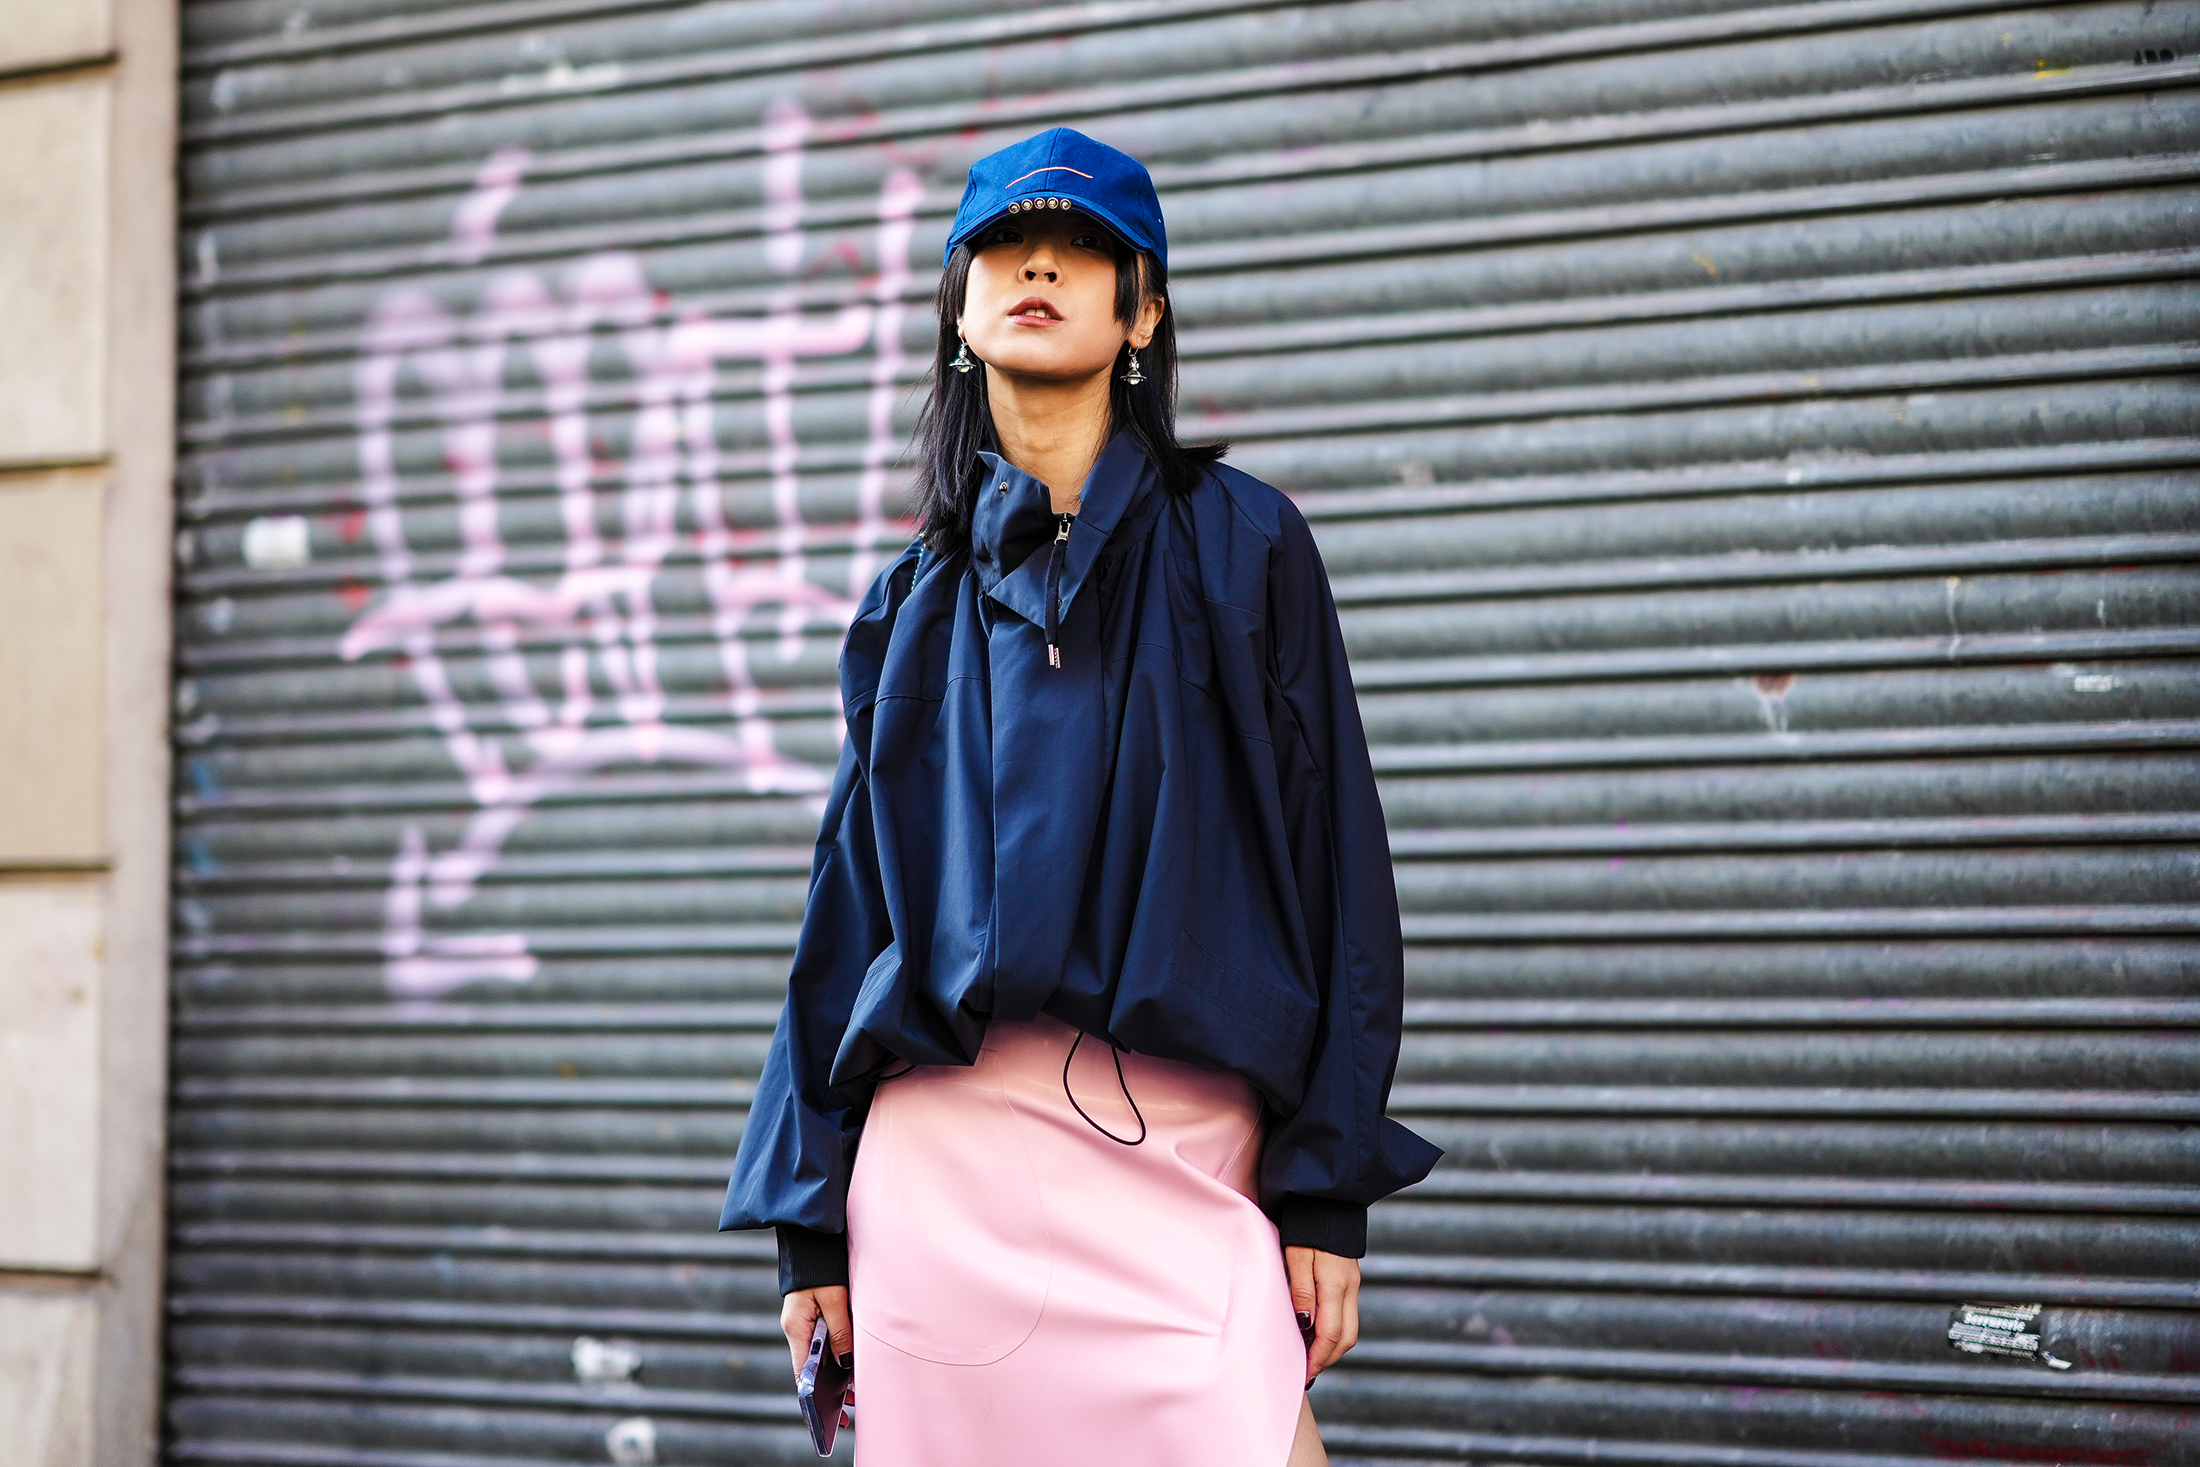 6 Stylish Ways to Wear a Baseball Hat: Outfit Ideas That Are Chic & Easy